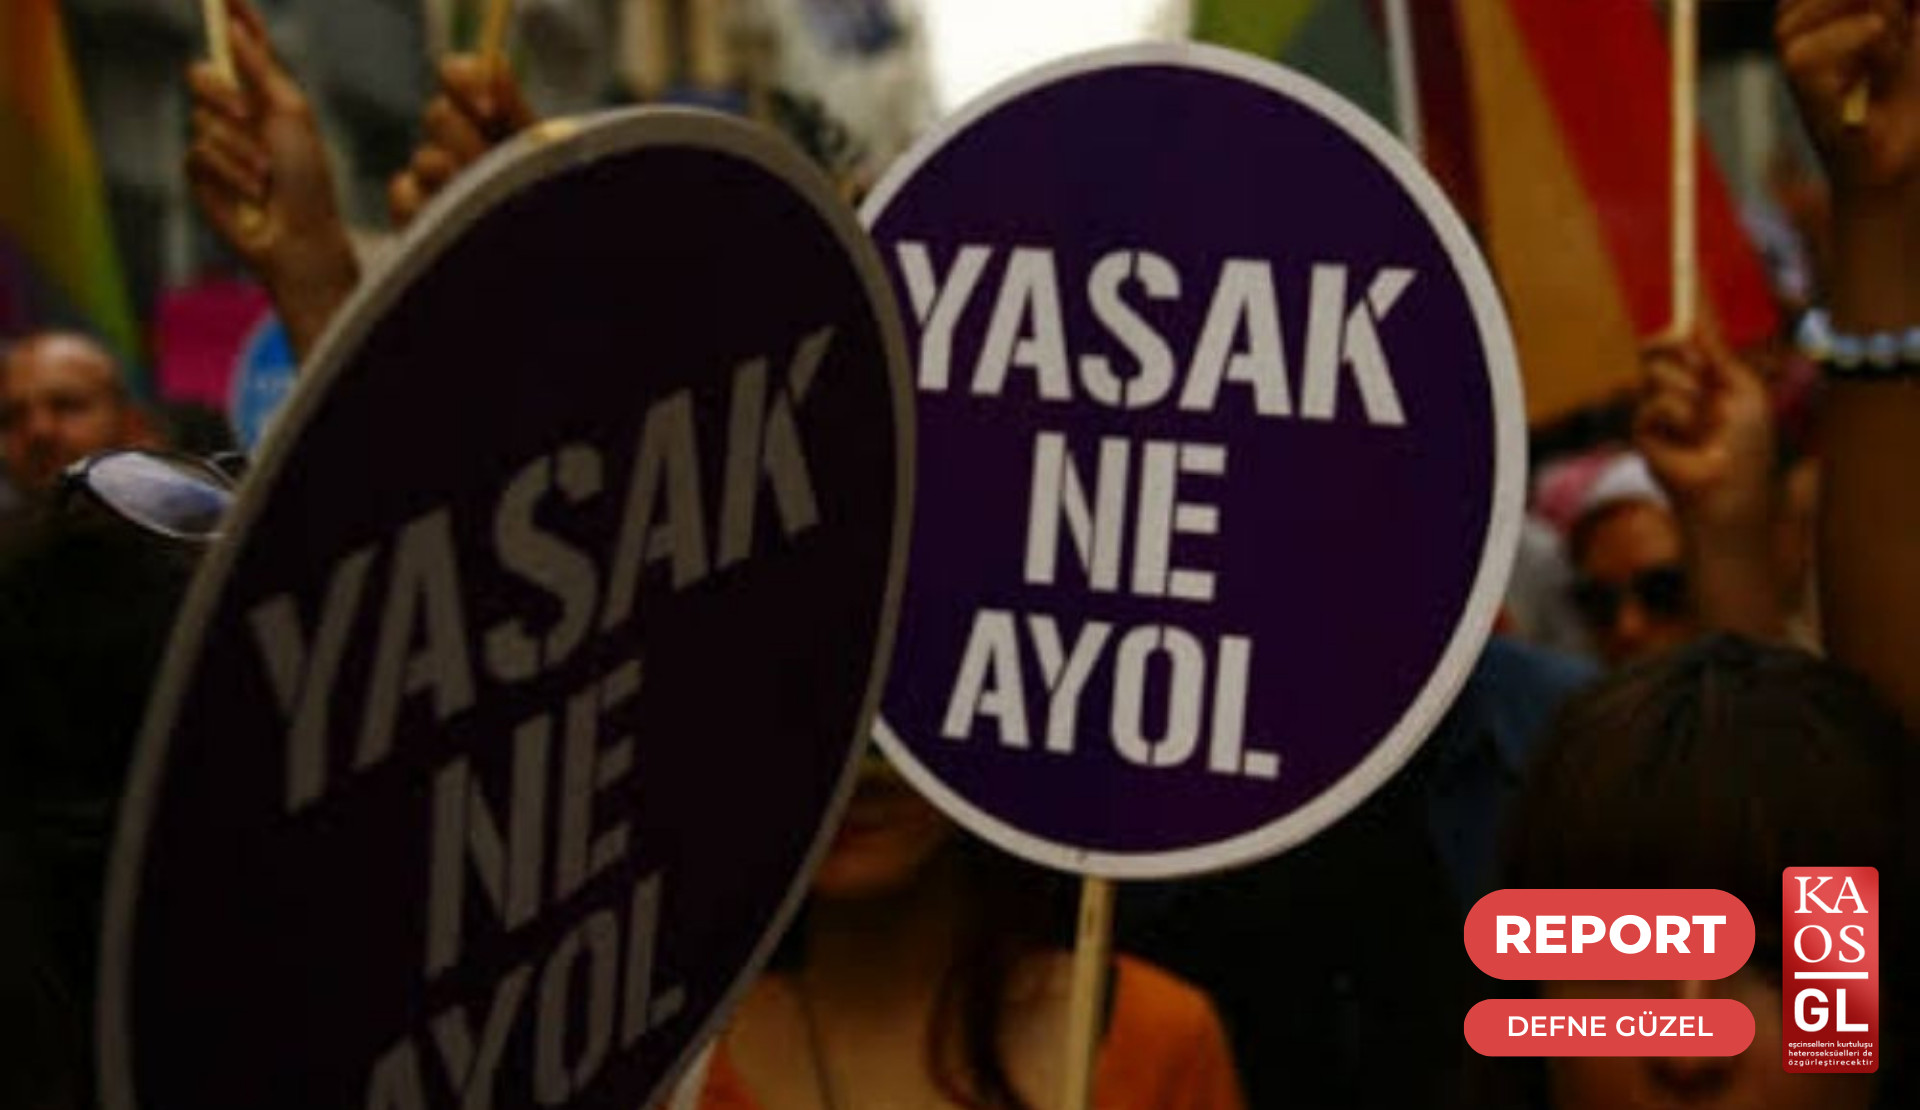 Violation of Rights against LGBTI+s in February: TRT World’s hate documentary draws praise while KuirFest faces ban | Kaos GL - News Portal for LGBTI+ News